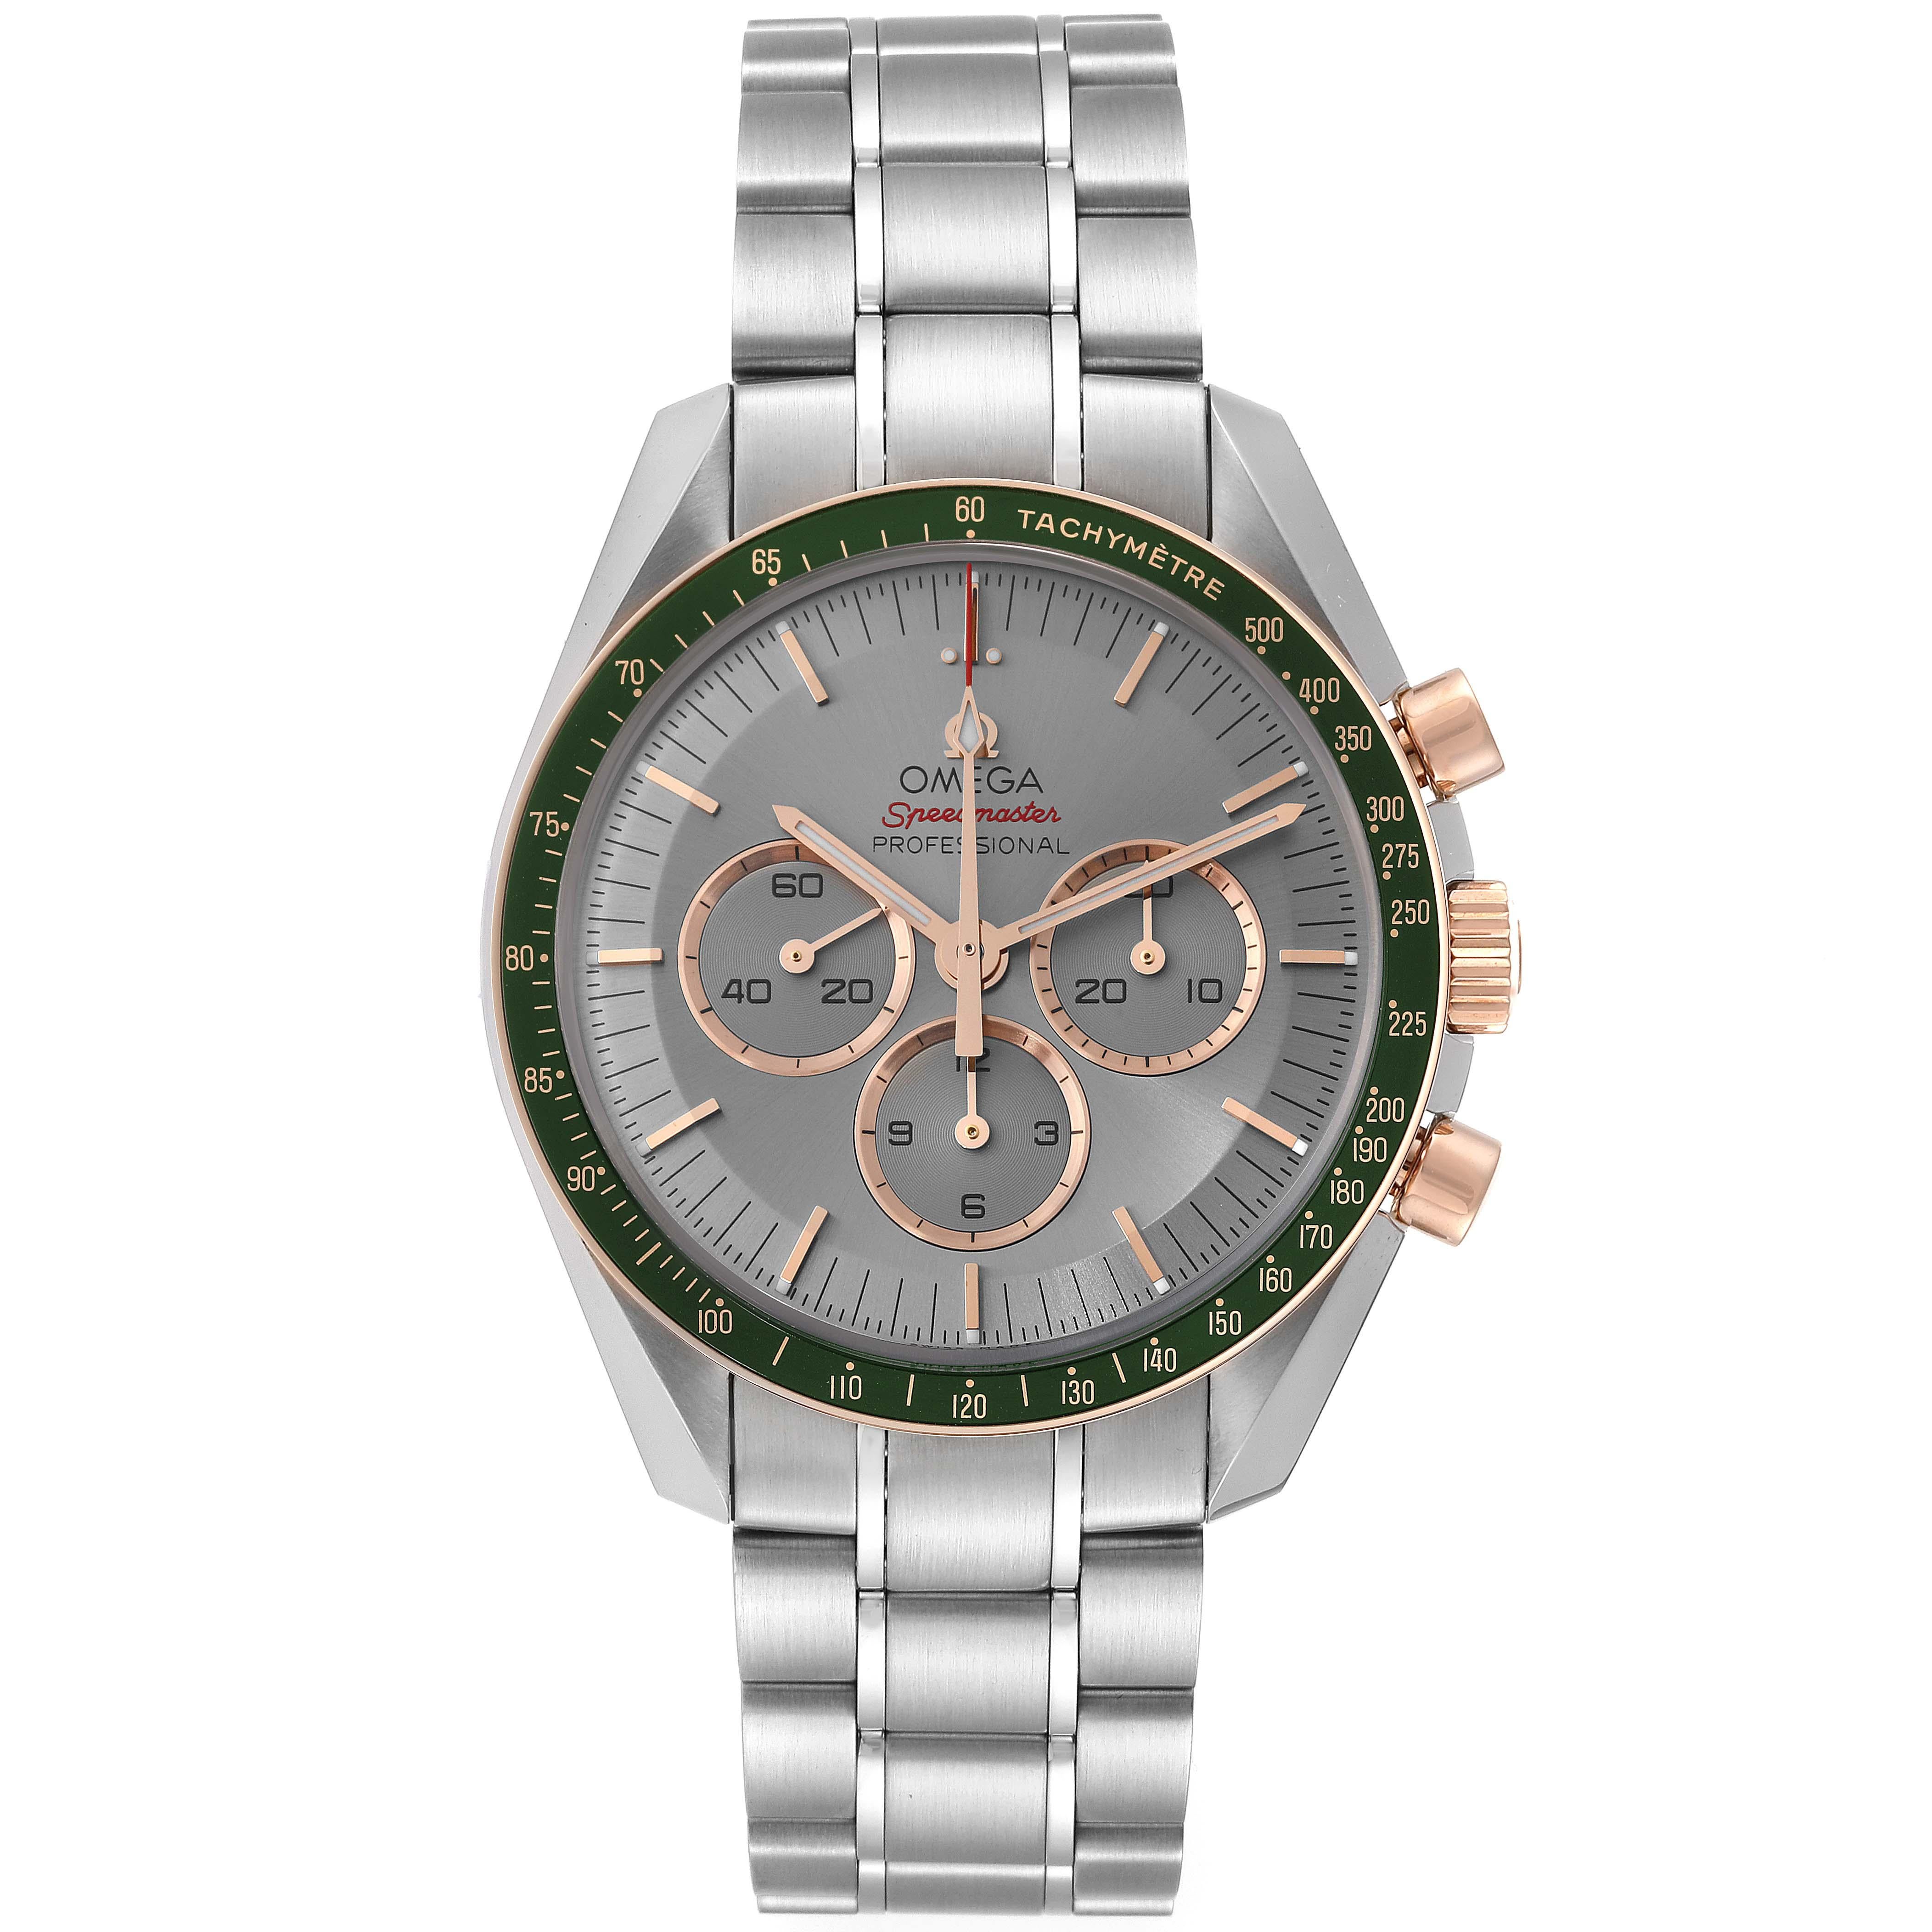 Omega Speedmaster Tokyo 2020 Olympics LE Steel Mens Watch 522.20.42.30.06.001 Unworn. Manual winding chronograph movement. Stainless steel round case 42.0 mm in diameter. 18k rose gold bezel with green aluminum tachymeter insert. Scratch resistant